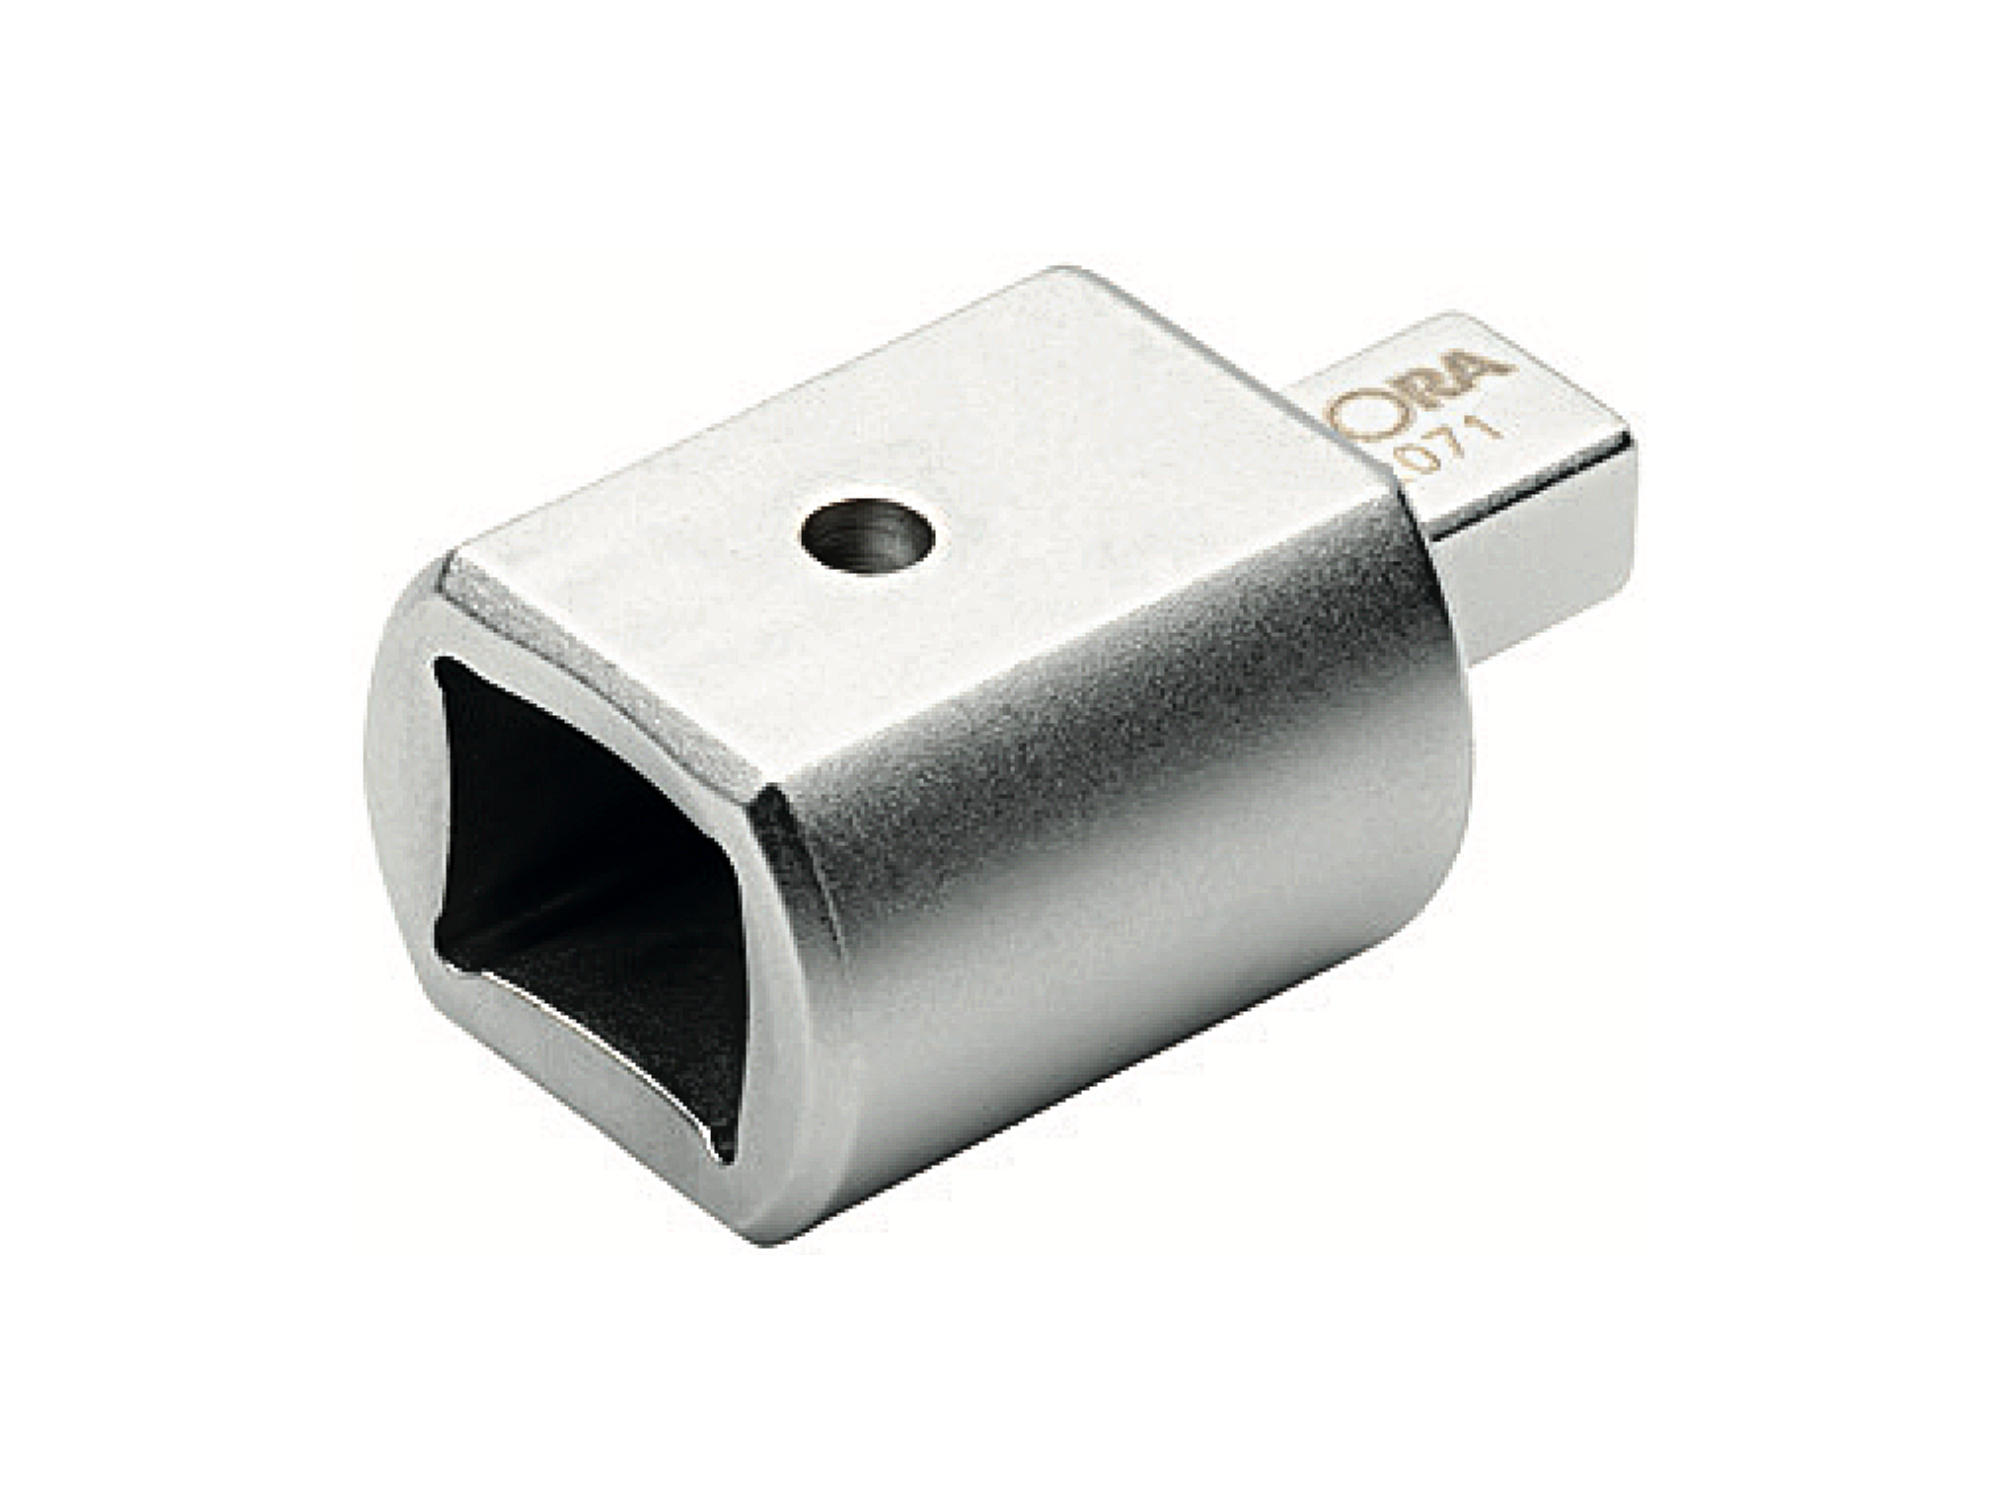 ELORA 2071 Socket Adaptor for Insert Tool 9x12 and 14x8 mm - Premium Socket Adaptor from ELORA - Shop now at Yew Aik.